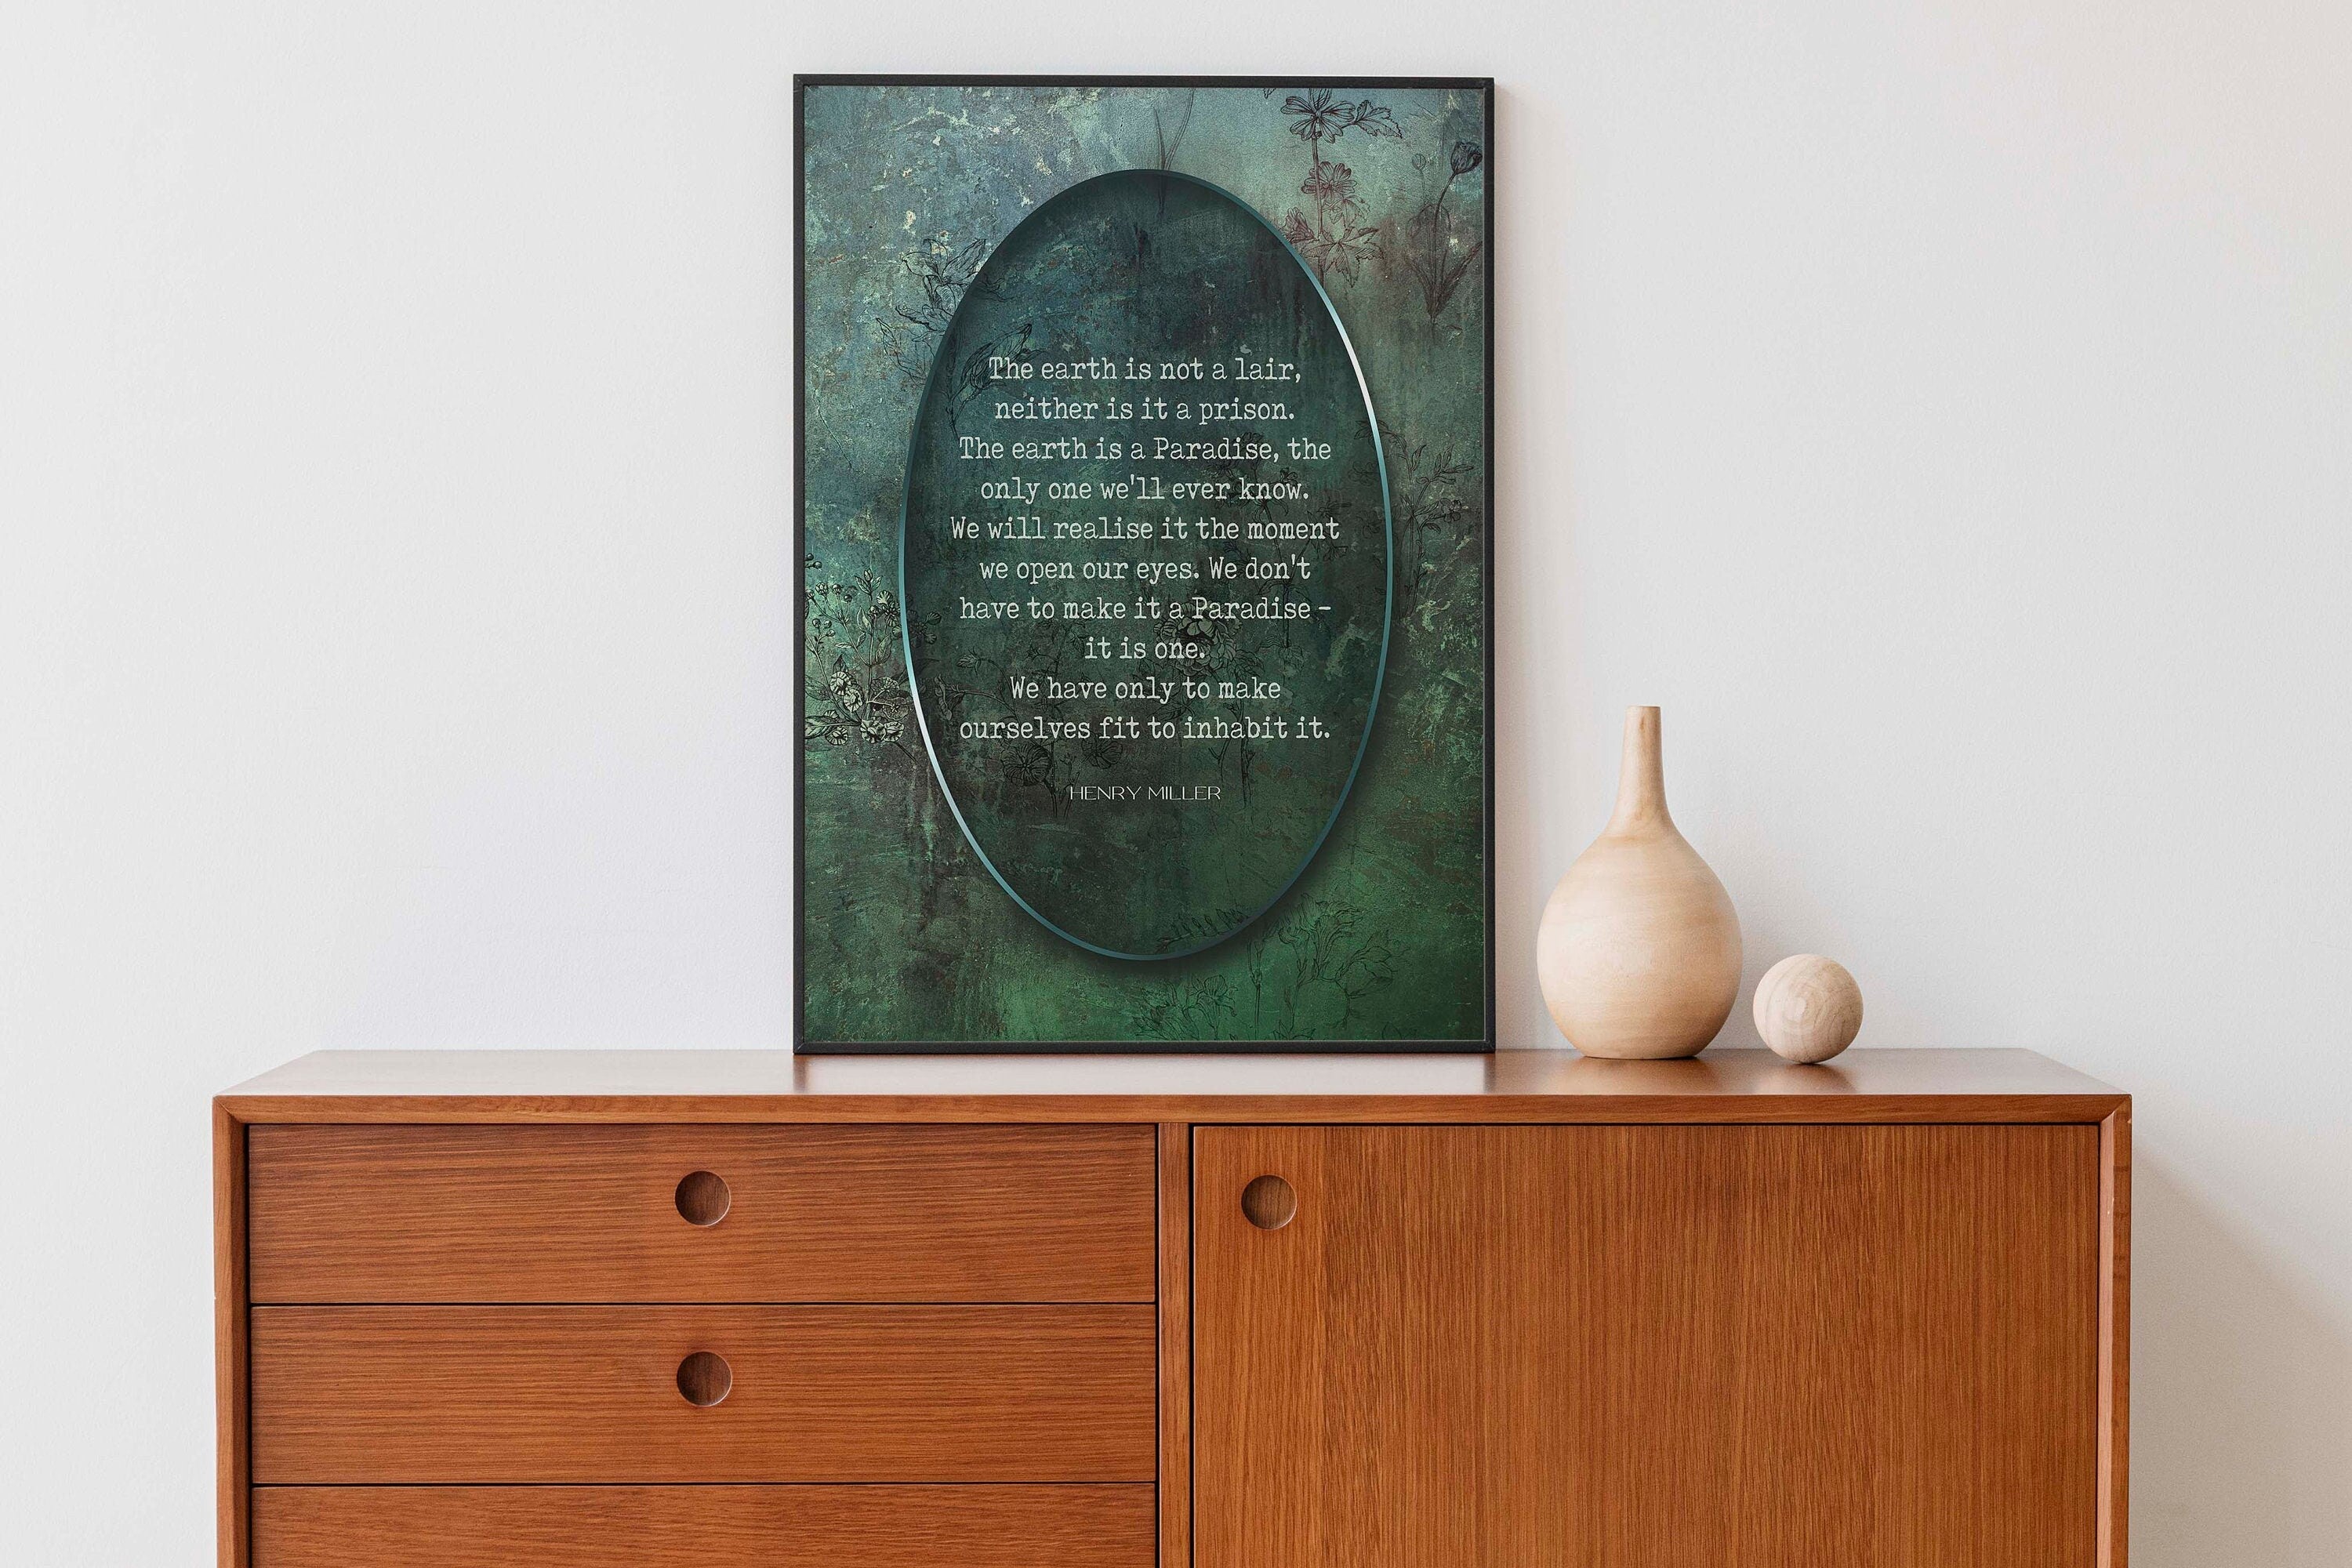 The earth is a Paradise Henry Miller Quote Wall Art Print, Unframed Inspirational Botanical Nature Wall Decor in Green